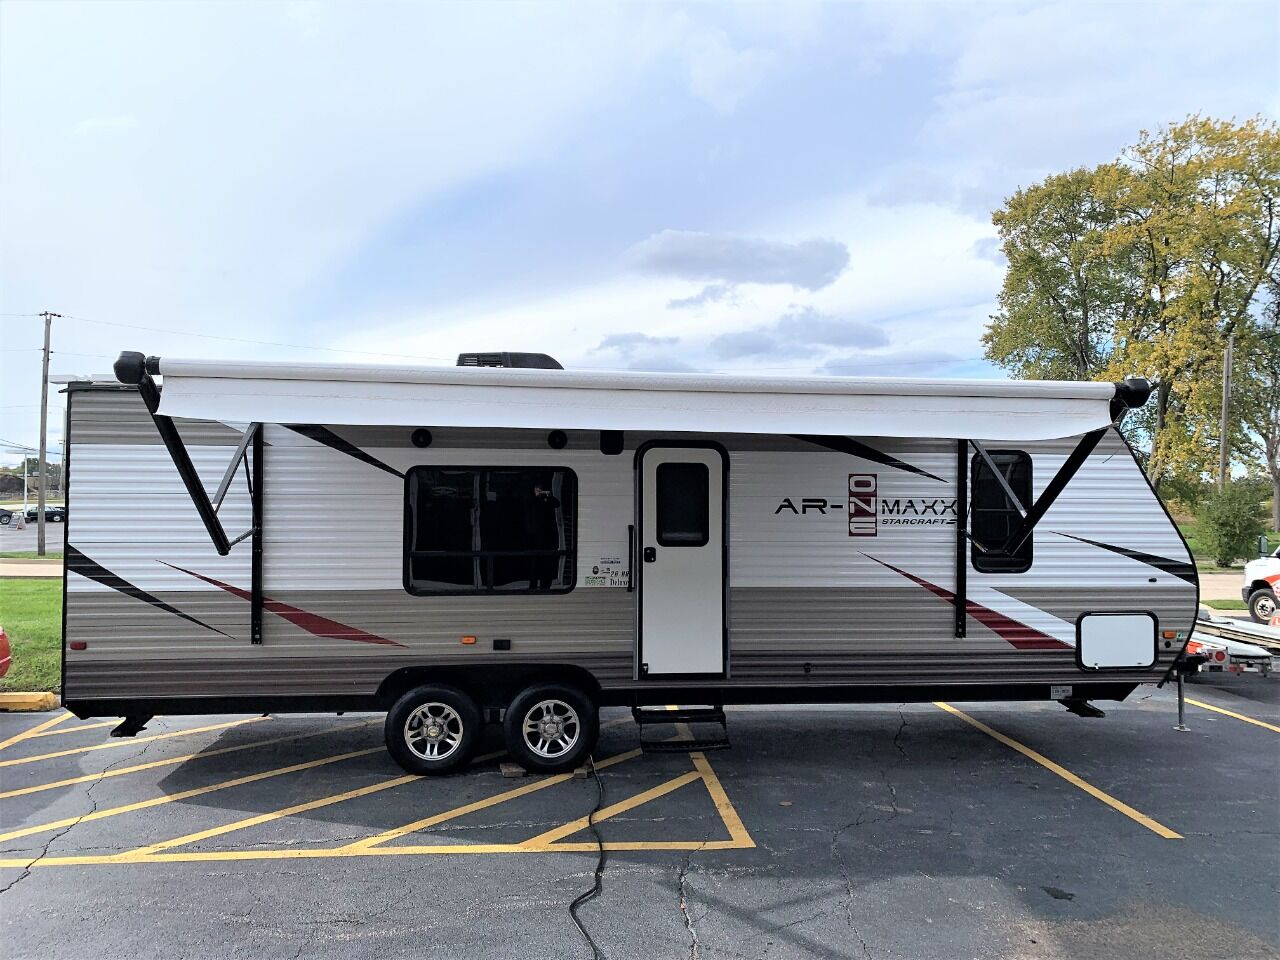 RVs & Campers For Sale In Illinois   Carsforsale.com®